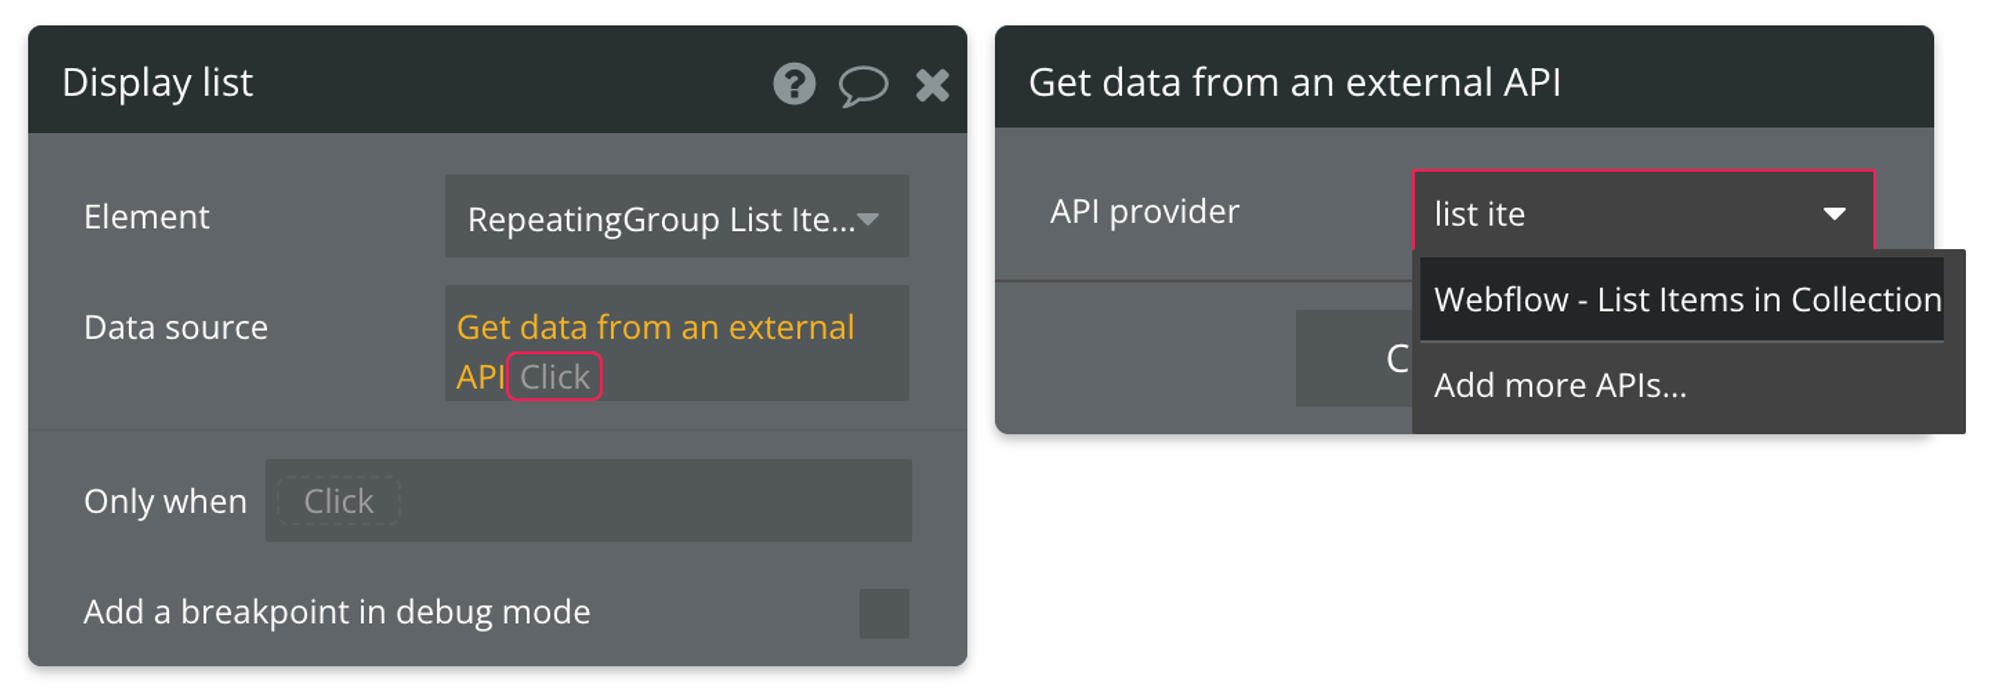 Select "Get data from external API" from the list of data sources, then find Webflow - List Items in Collection from the list of API providers